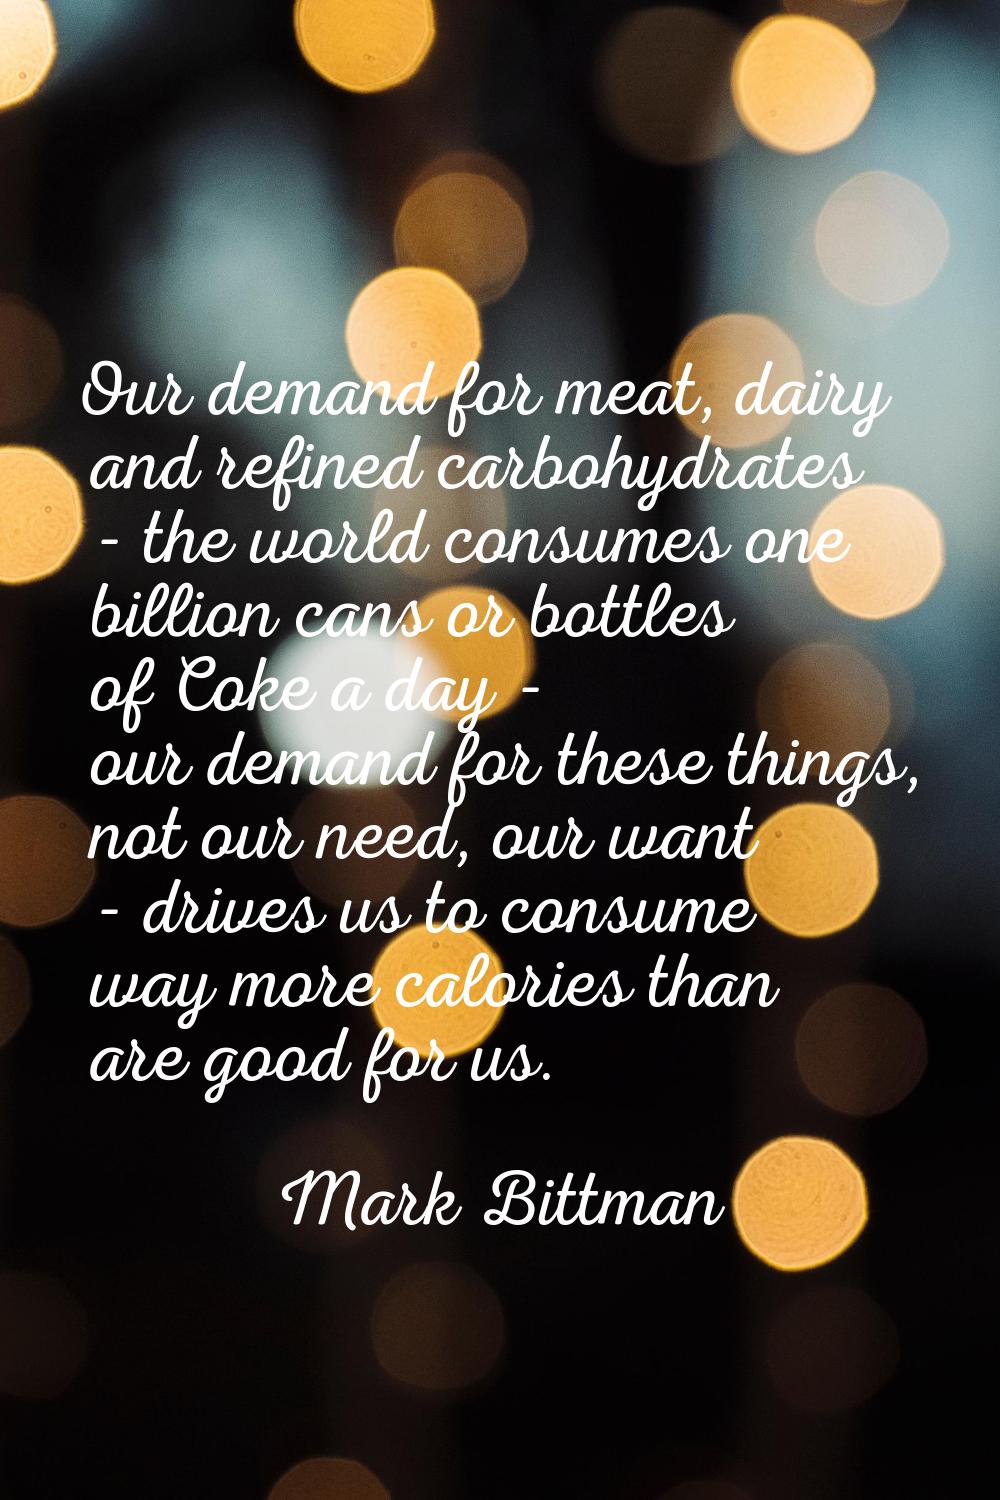 Our demand for meat, dairy and refined carbohydrates - the world consumes one billion cans or bottl